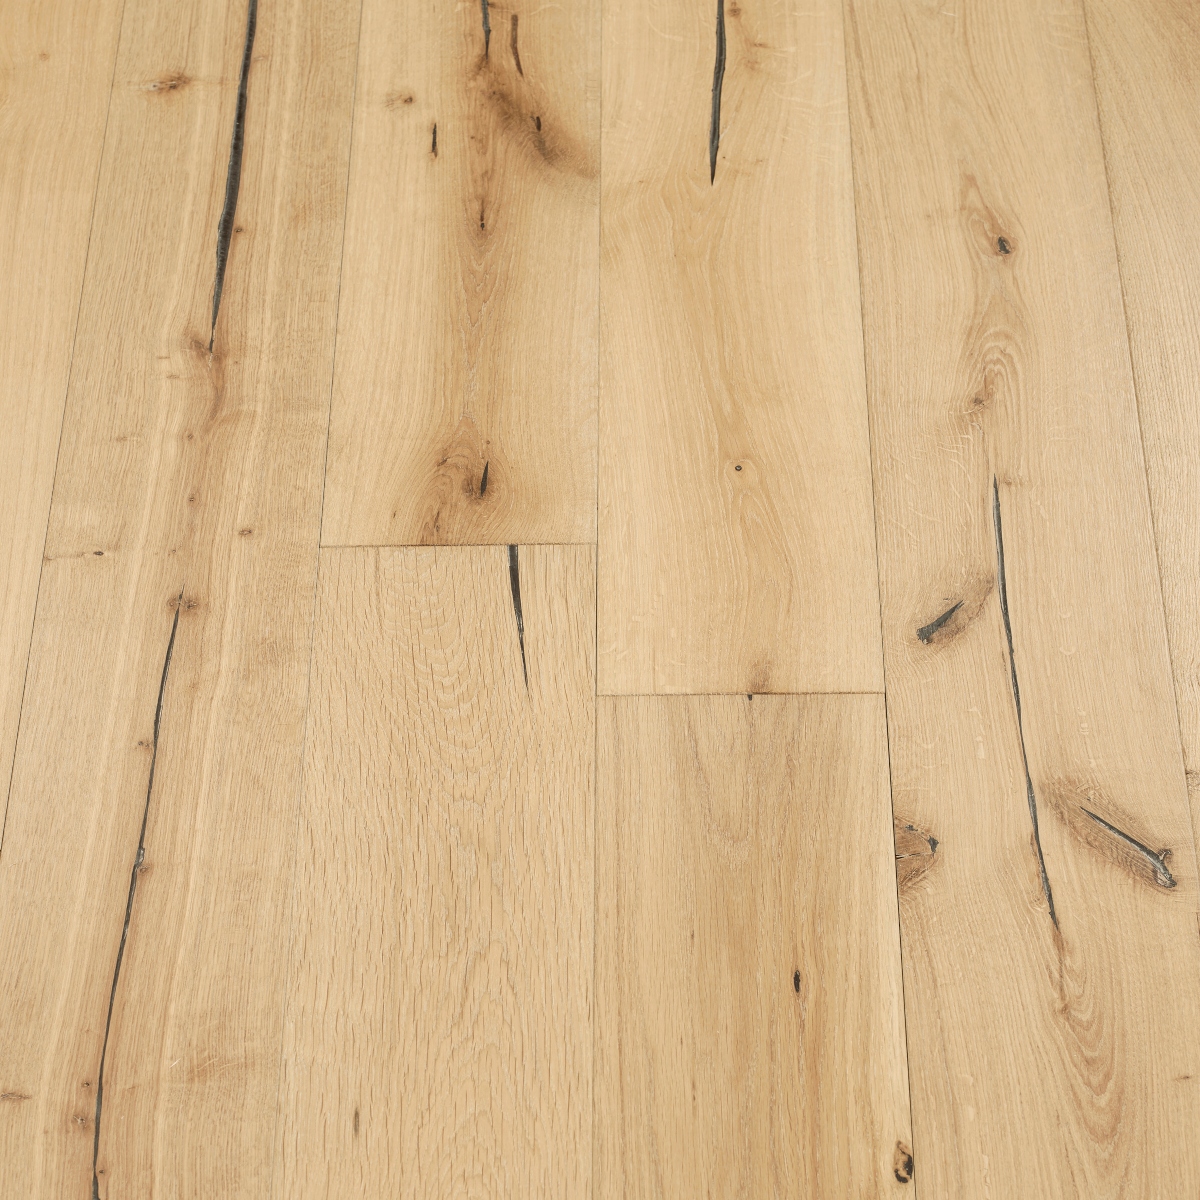 Distressed Satin5 WoodFlooring - image showcasing distressed wood flooring with a satin finish in warm and neutral tones, providing a timeless and elegant look.